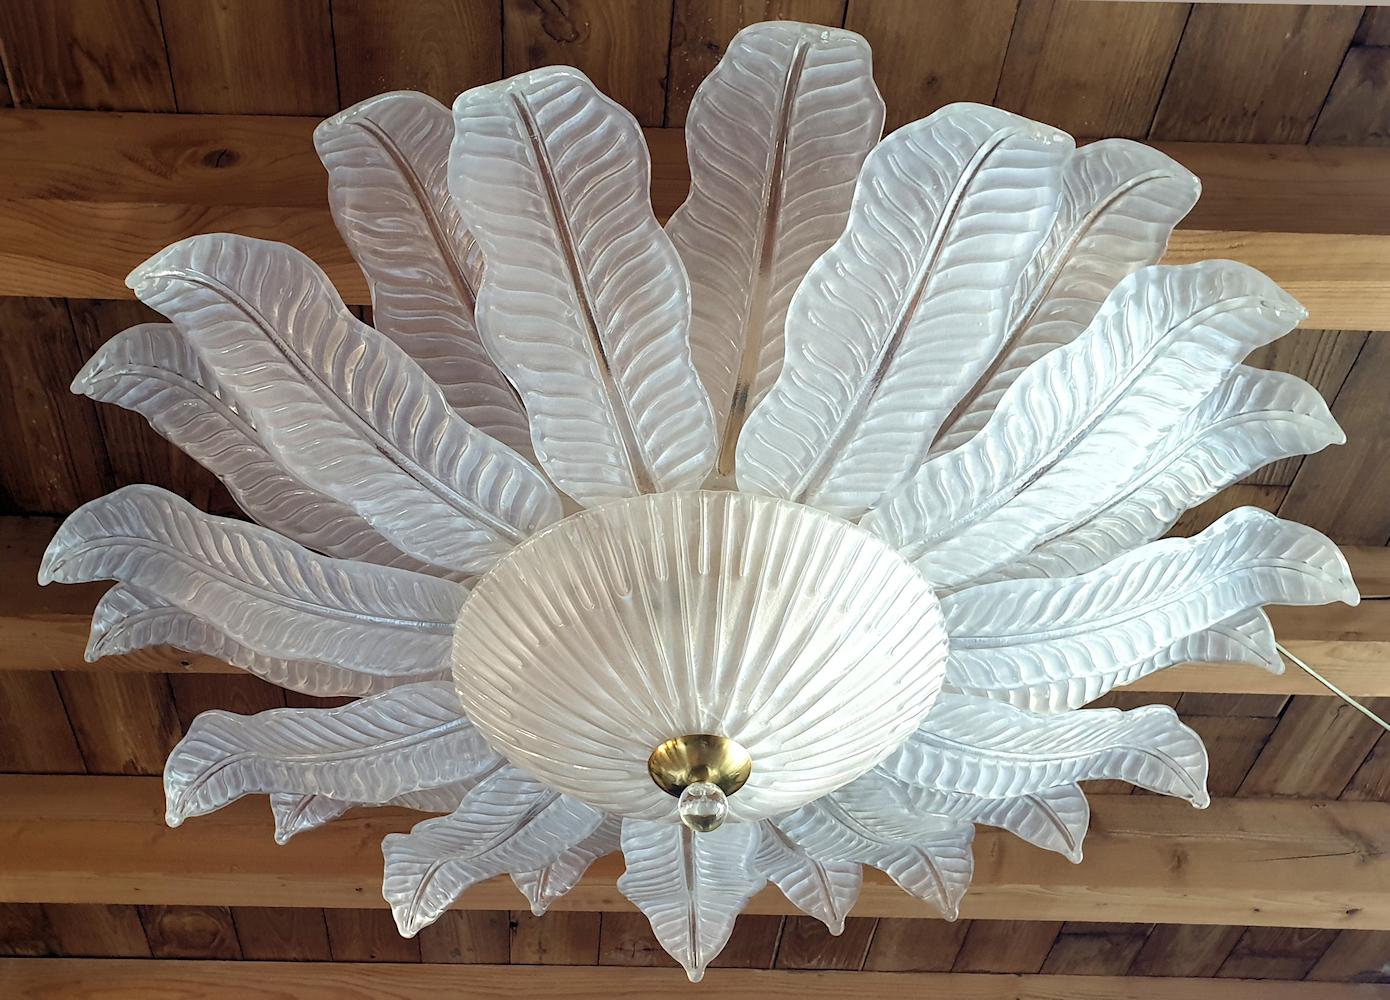 Extra large clear and frosted Murano glass leaves flushmount chandelier, by Barovier & Toso, Italy, 1970s.
The frame of the chandelier has been gold re-chromed.
Beautiful translucent warm light through the handmade Murano glass leaves.
9 lights,